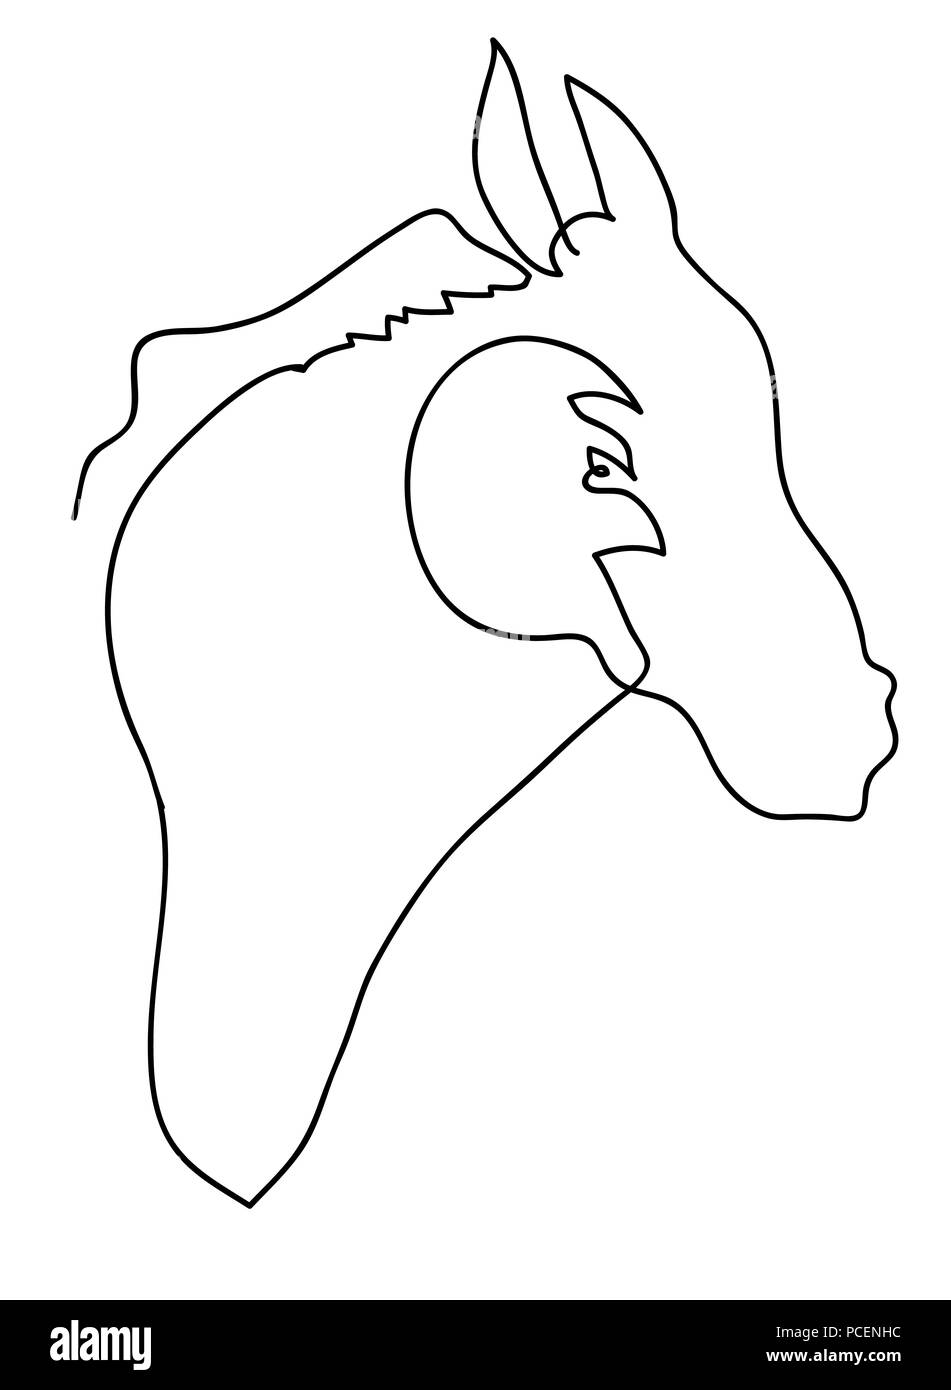 Horse head  Black and white simple line drawing of horse illustration. Stock Photo